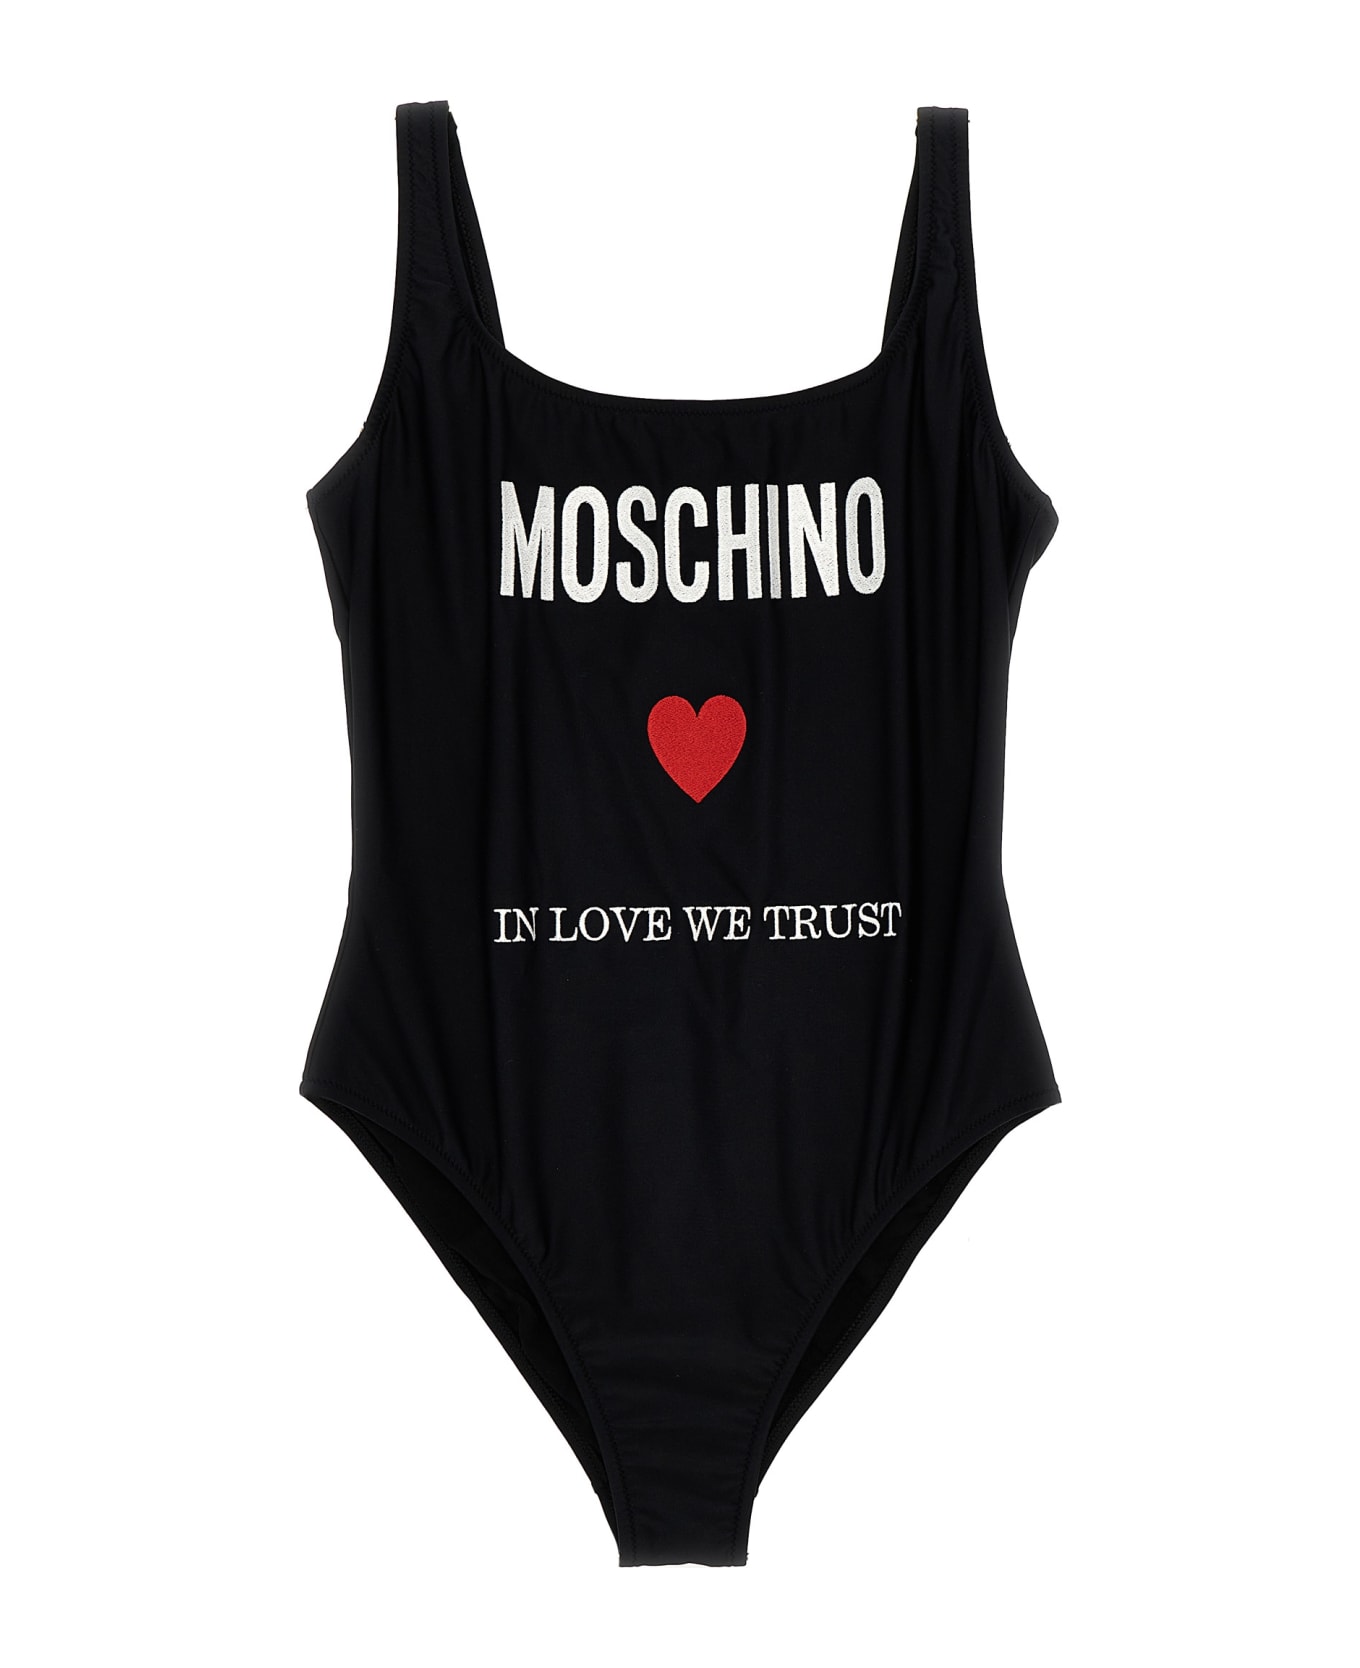 Moschino 'in Love We Trust' One-piece Swimsuit - BLACK